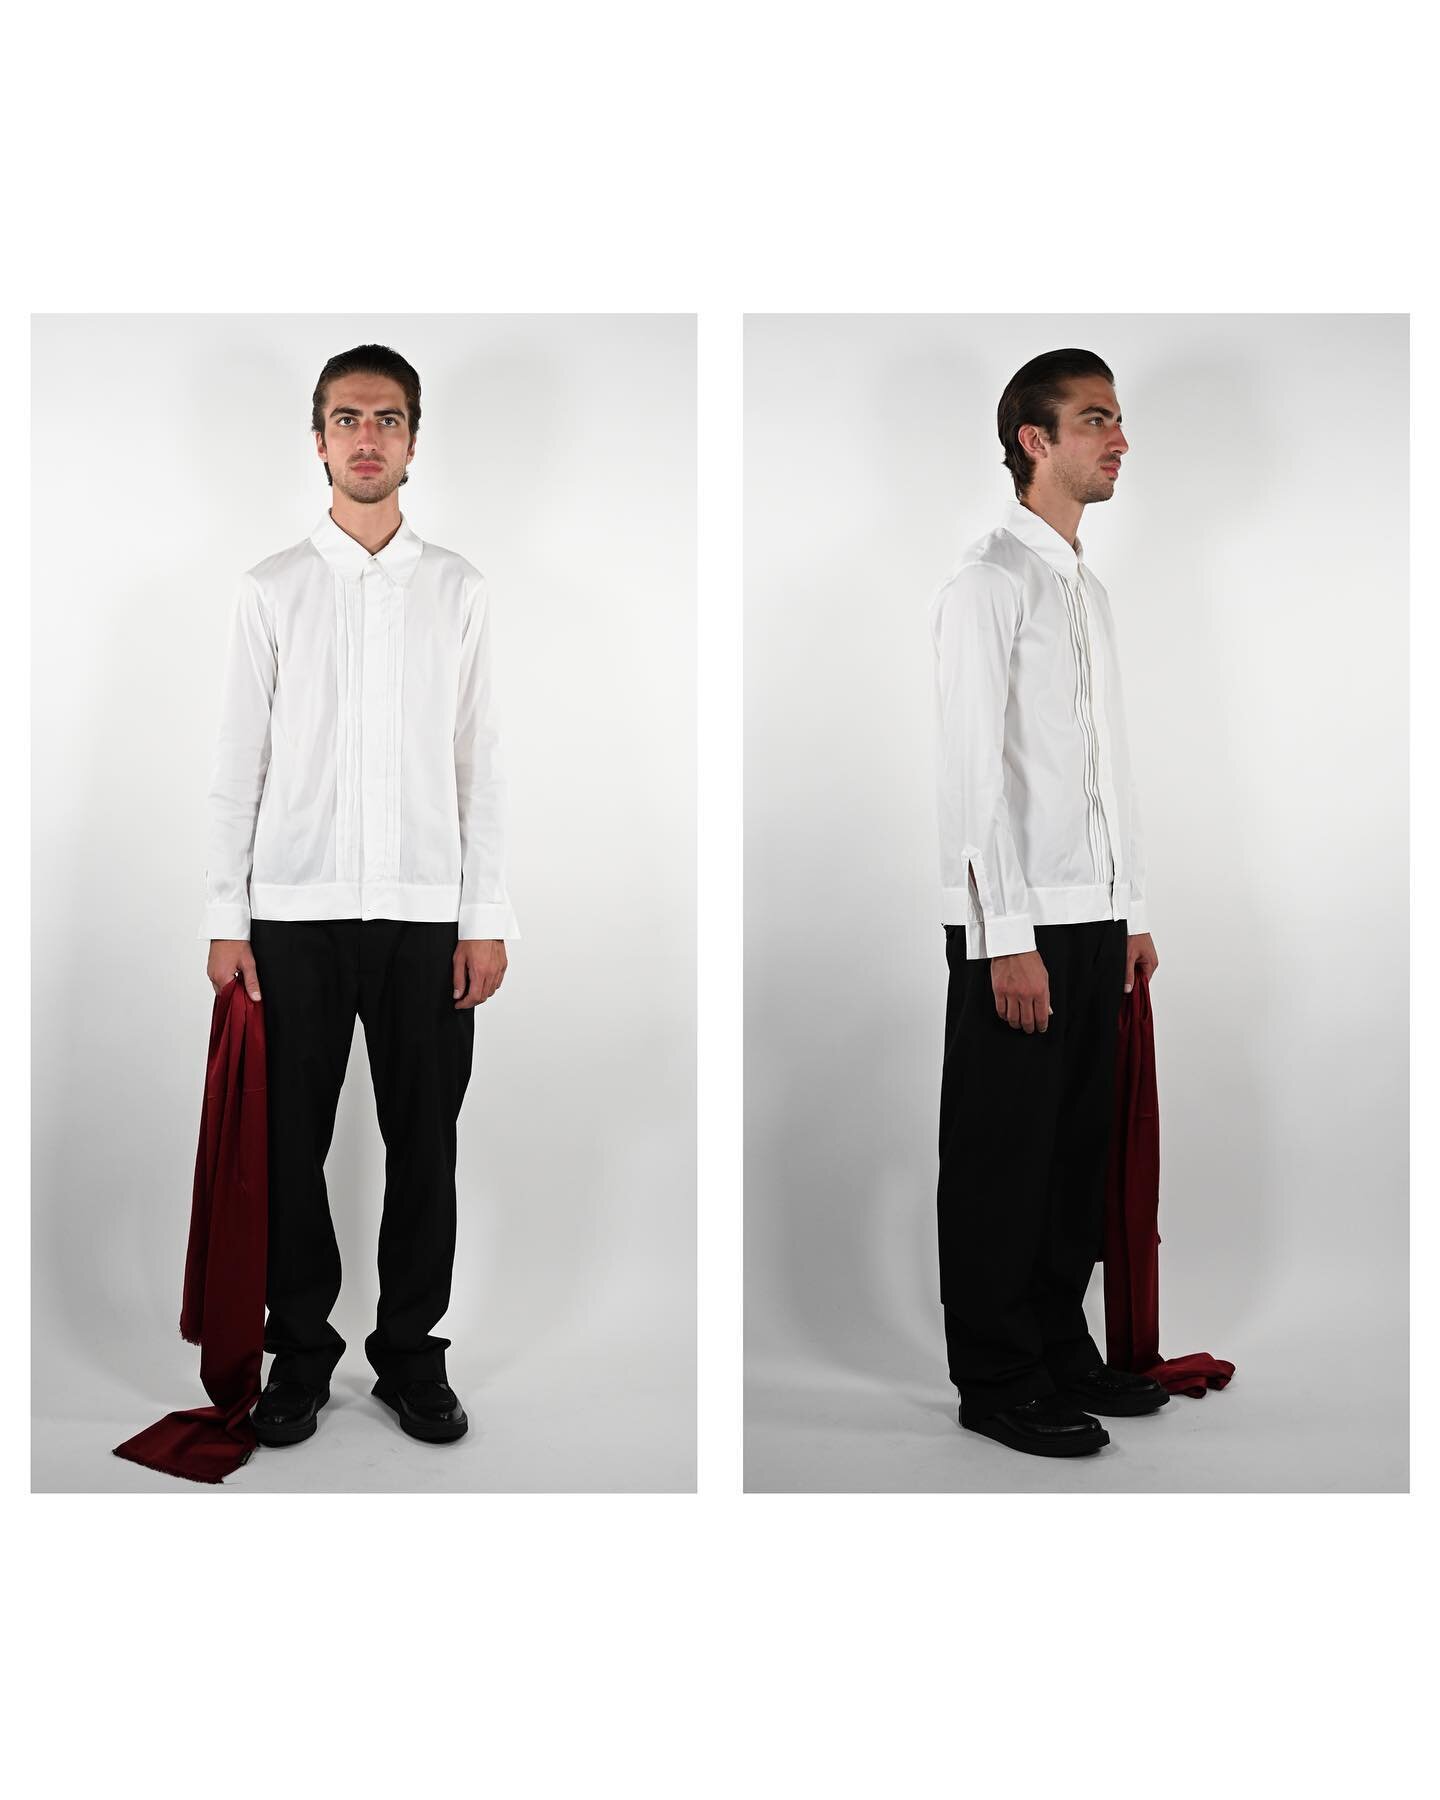 Look 2: Our White Tuxedo Shirt adorned with open-cuffs and the Back-Zip Trousers with a burgundy silk scarf sourced in Turkey. 

Photoshoot by @theo.rslt 
Modeling by @marco__signor 

Mens Spring/Summer 2023 collection available for viewing via evren